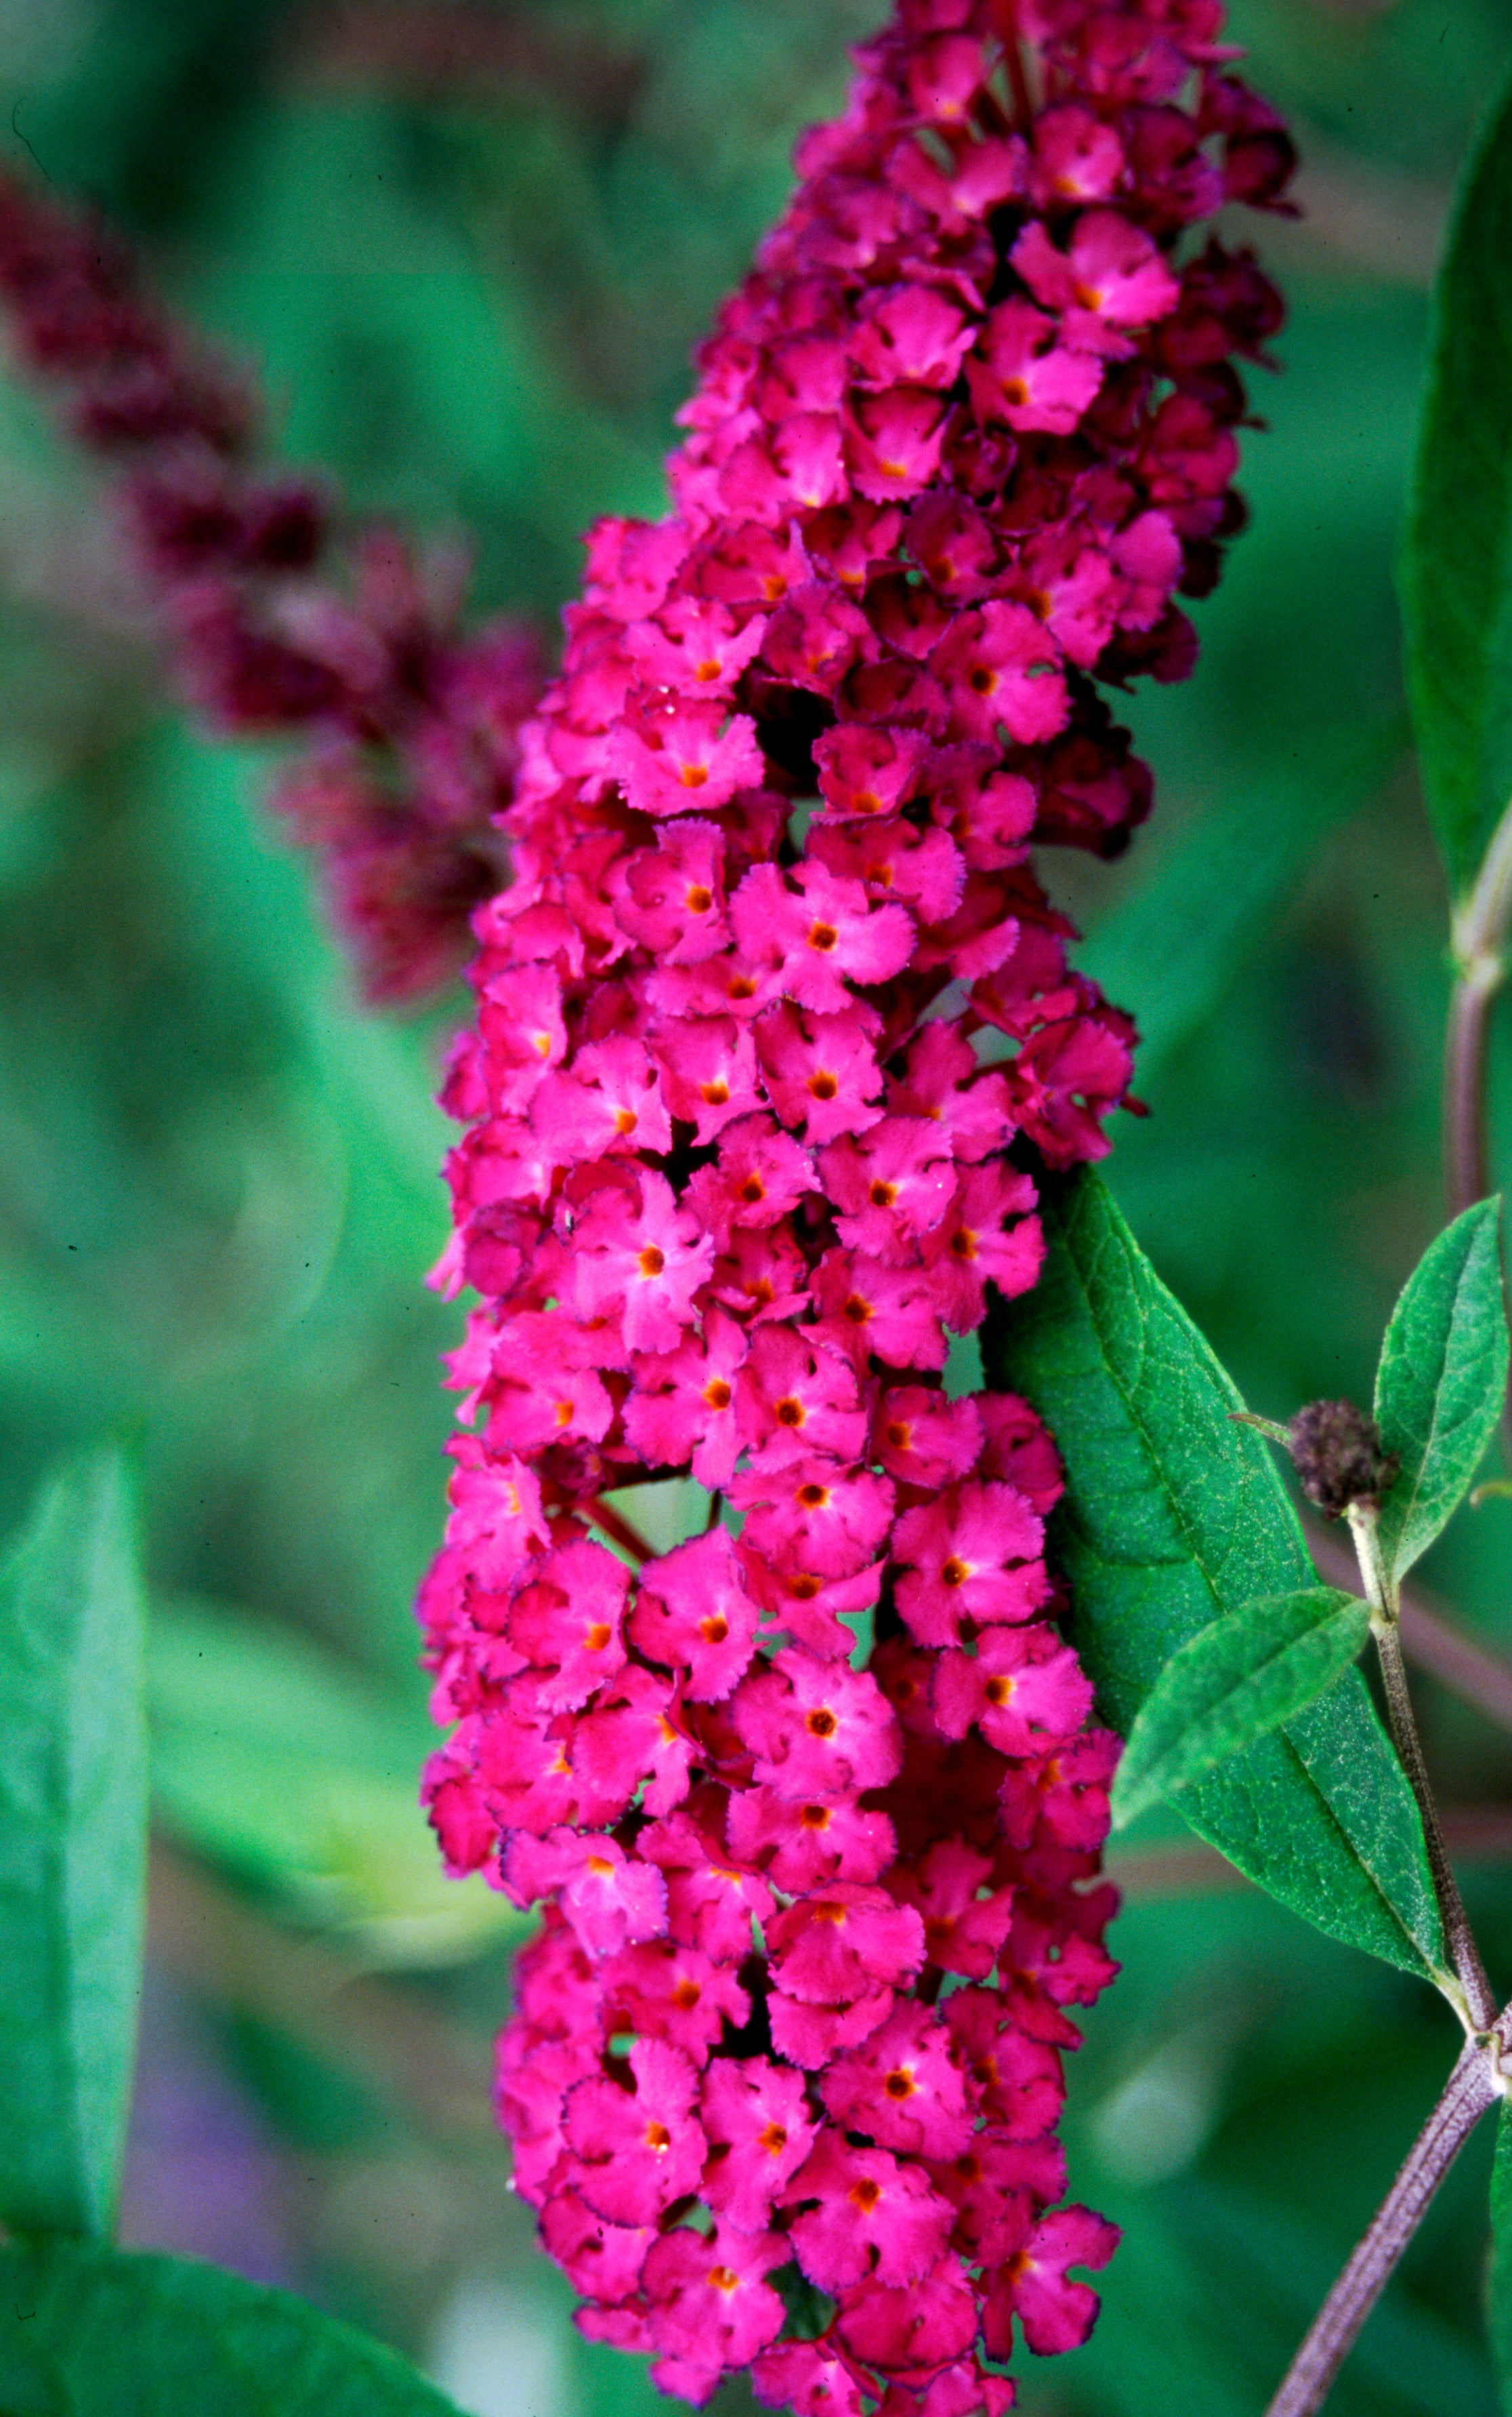 The full, pink-red blooms of award winning Royal Red butterfly bush